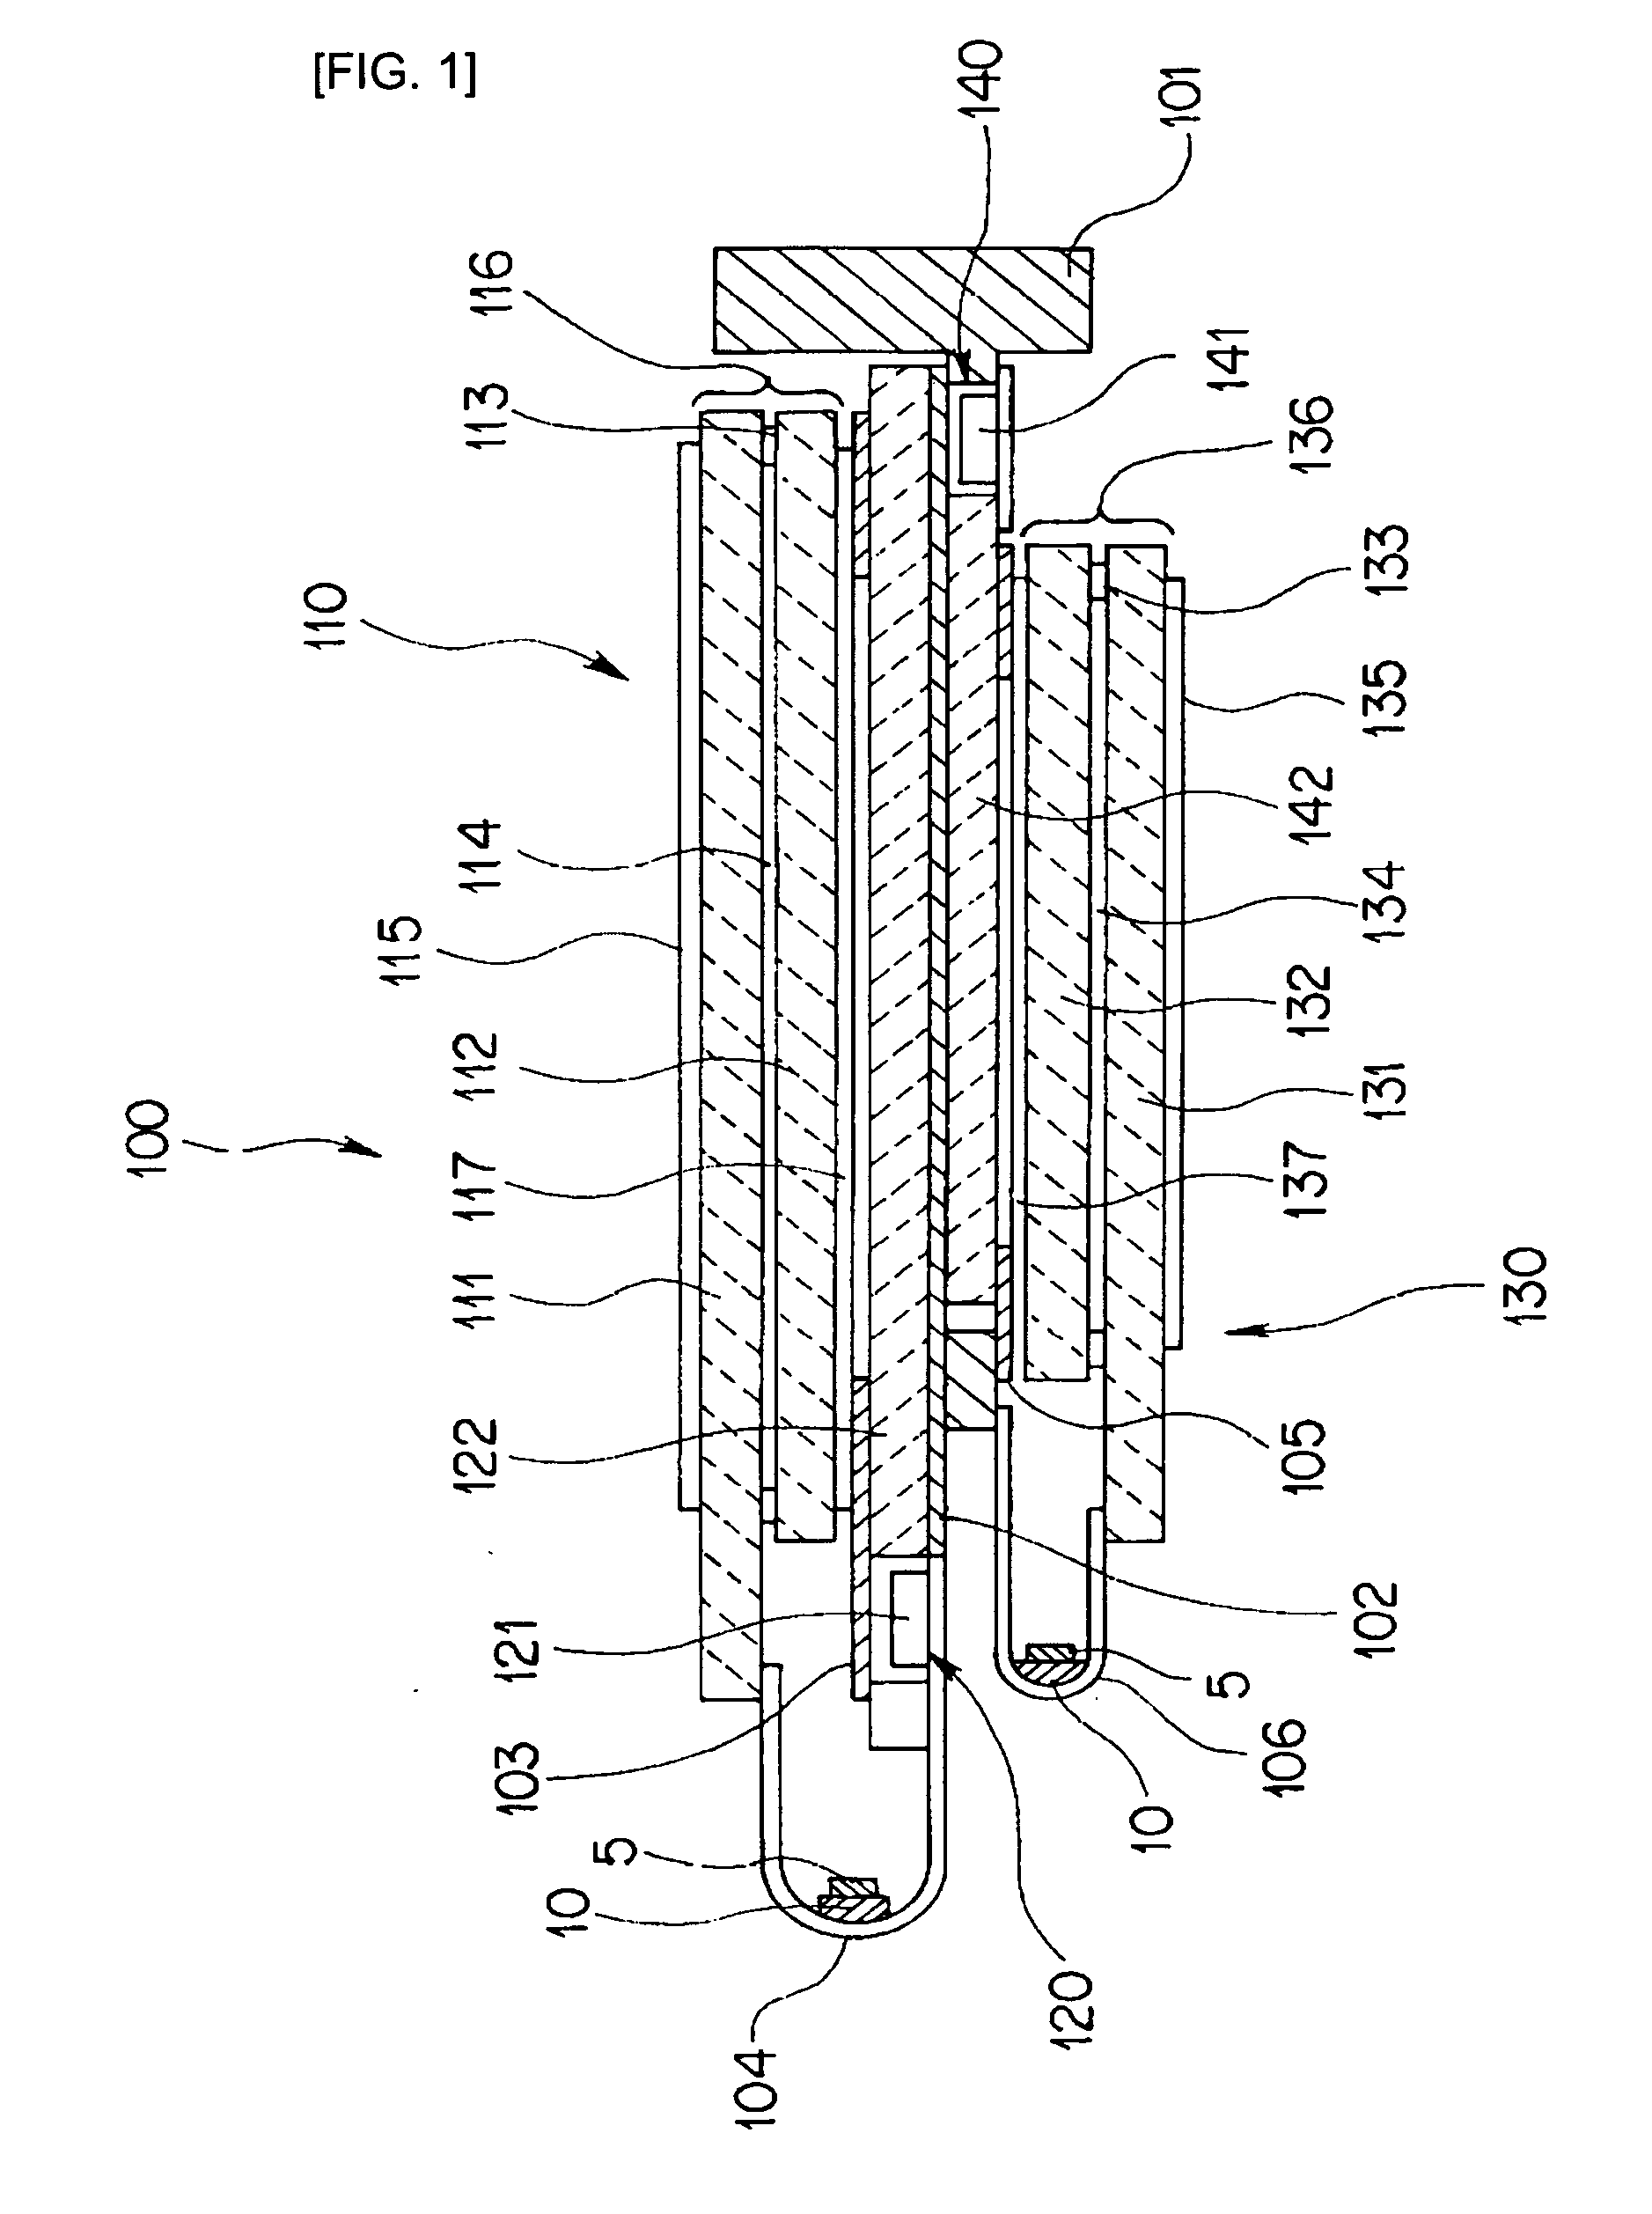 Electro-optical apparatus, flexible printed circuit board, manufacturing method for electro-optical apparatus, and electronic equipment